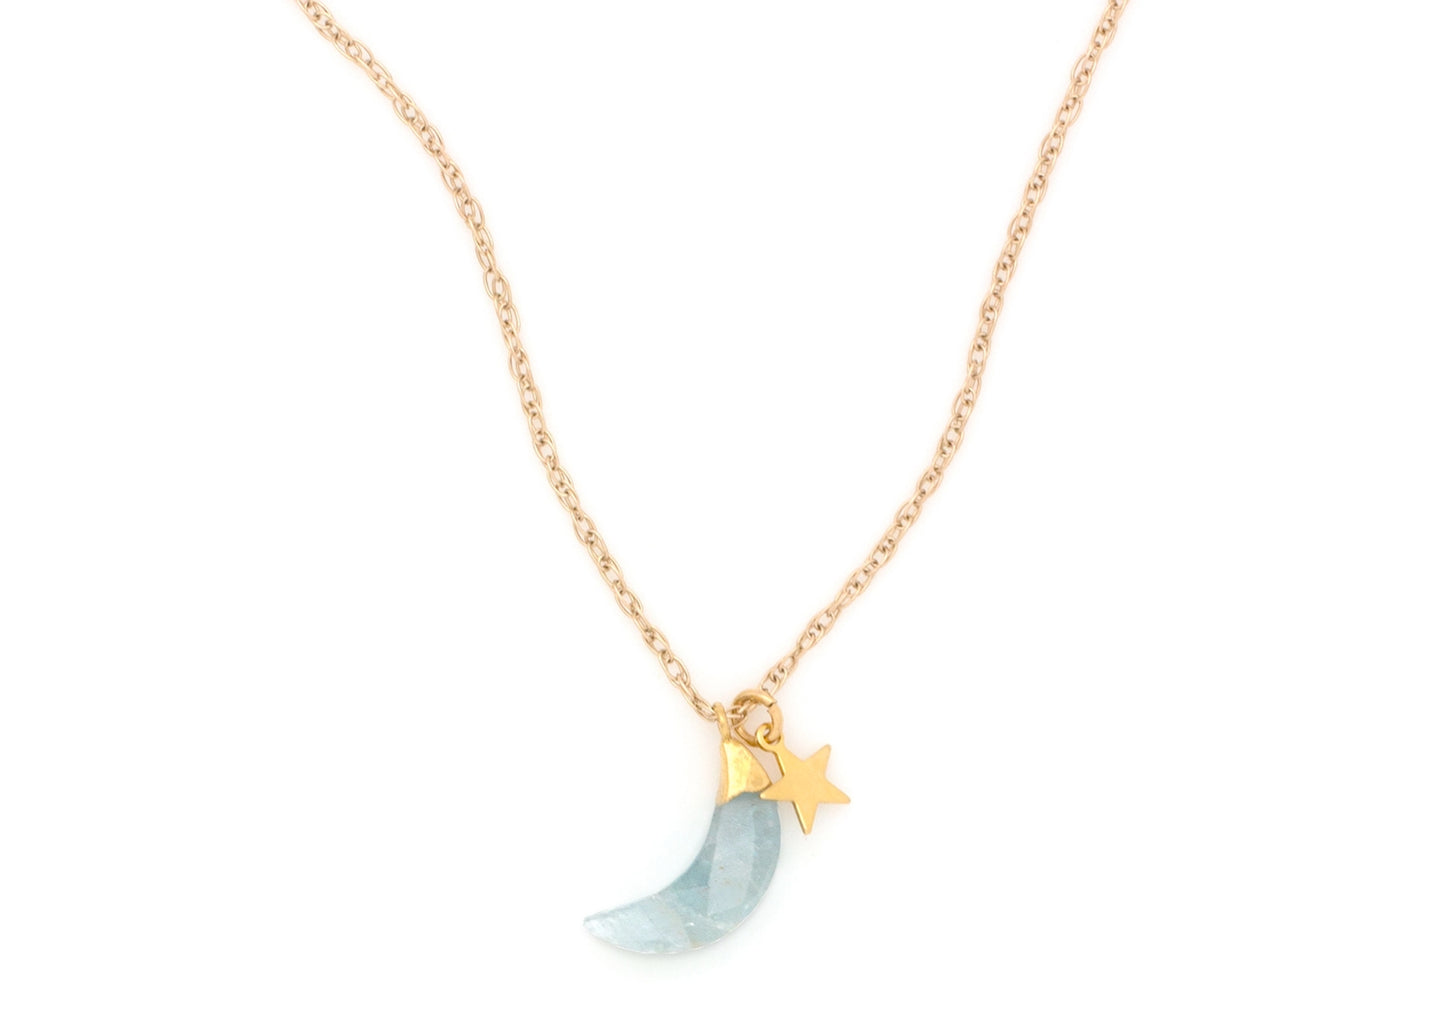 New Moon Necklace in Gold with Aquamarine